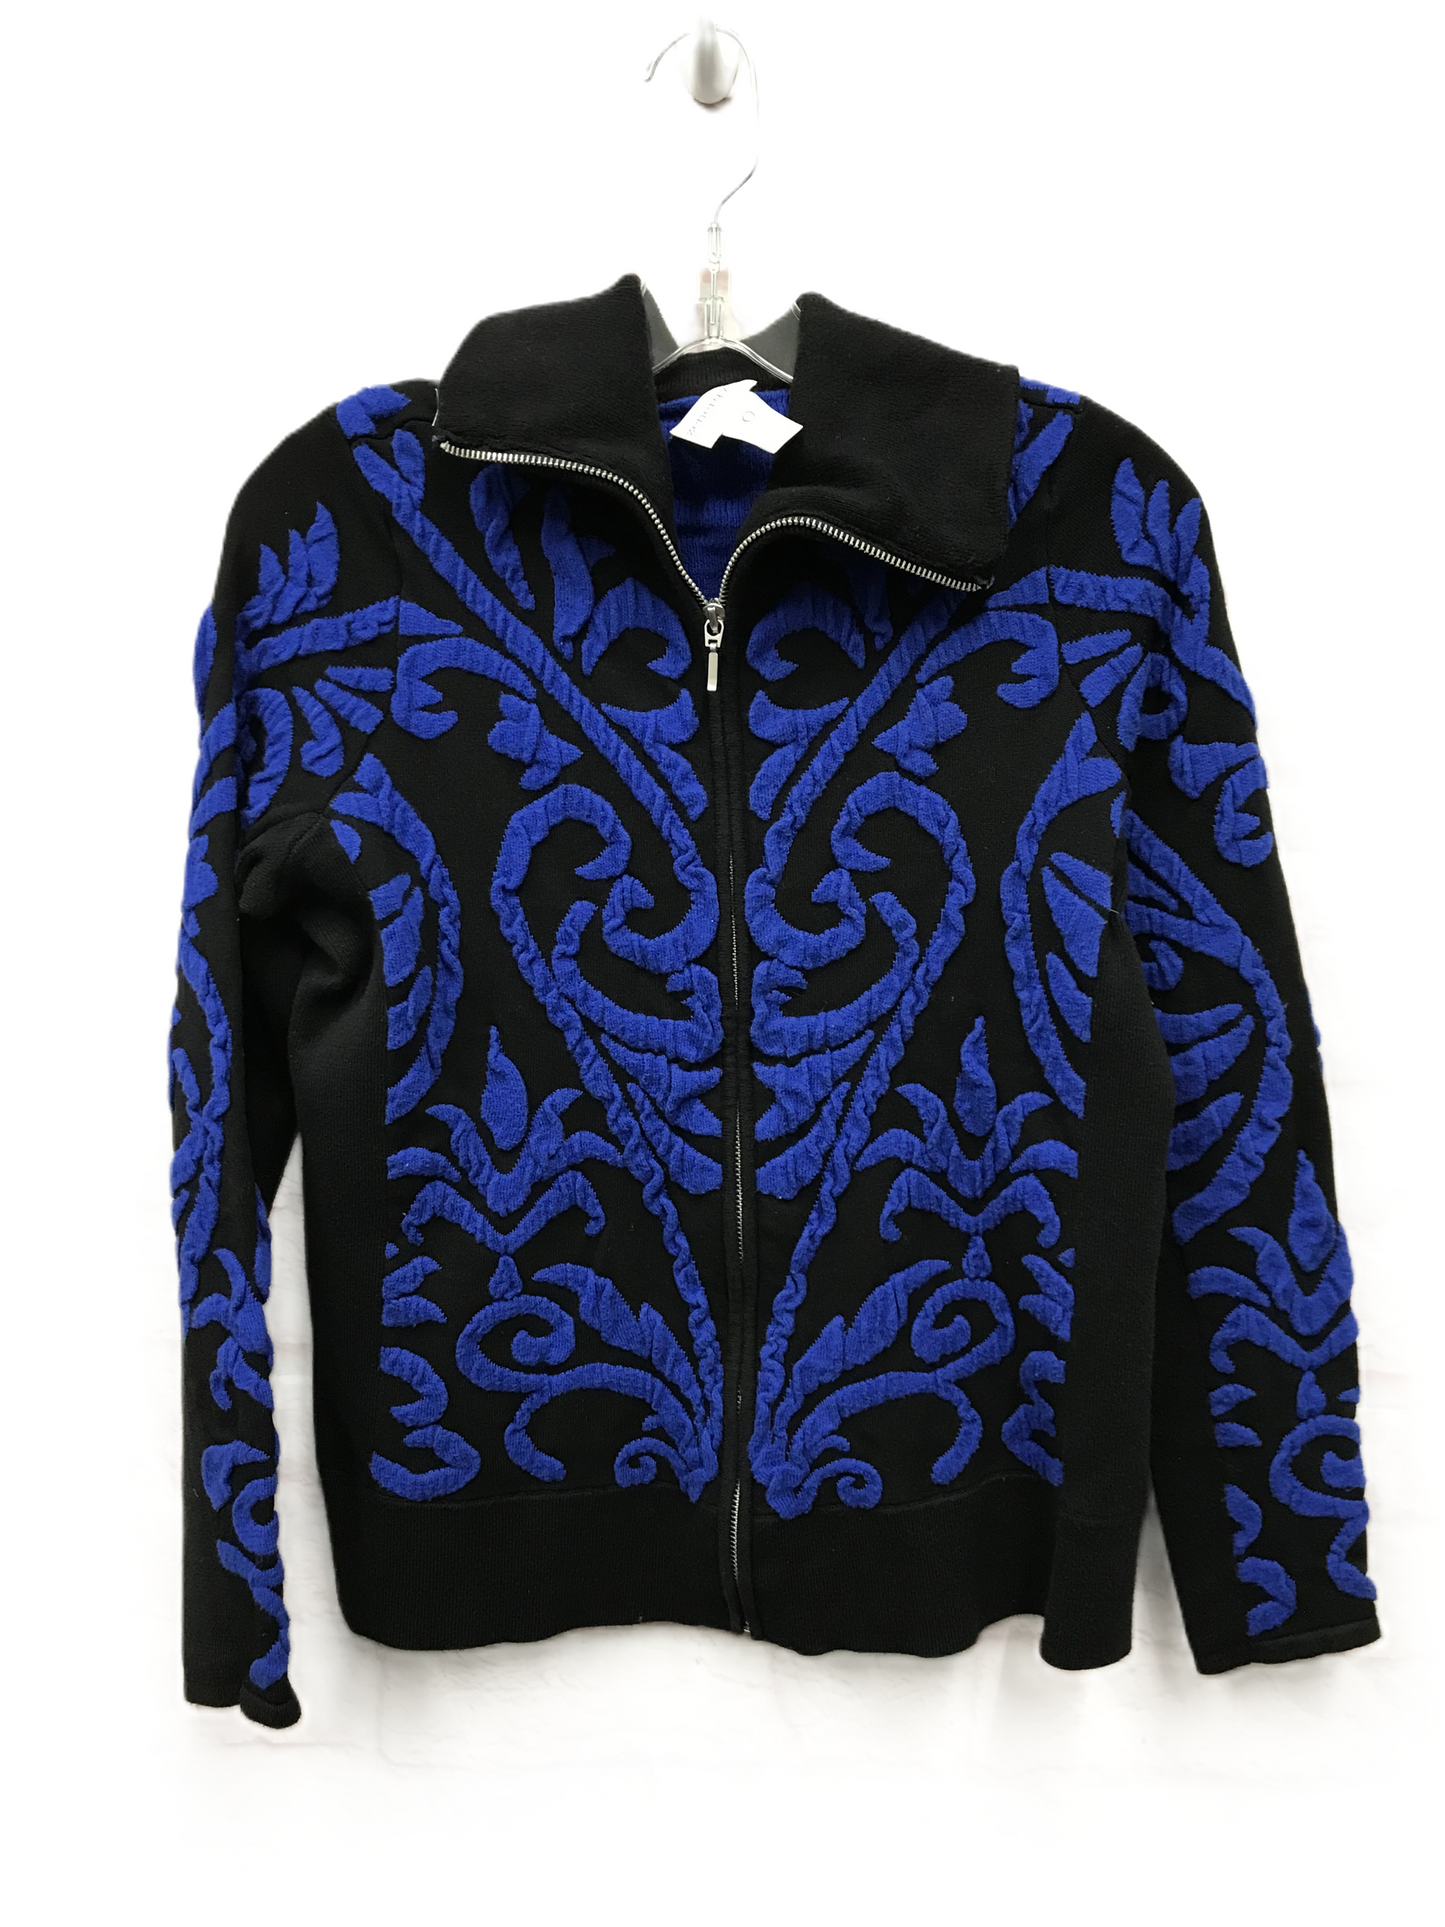 Black & Blue Sweater Cardigan By Chicos, Size: S